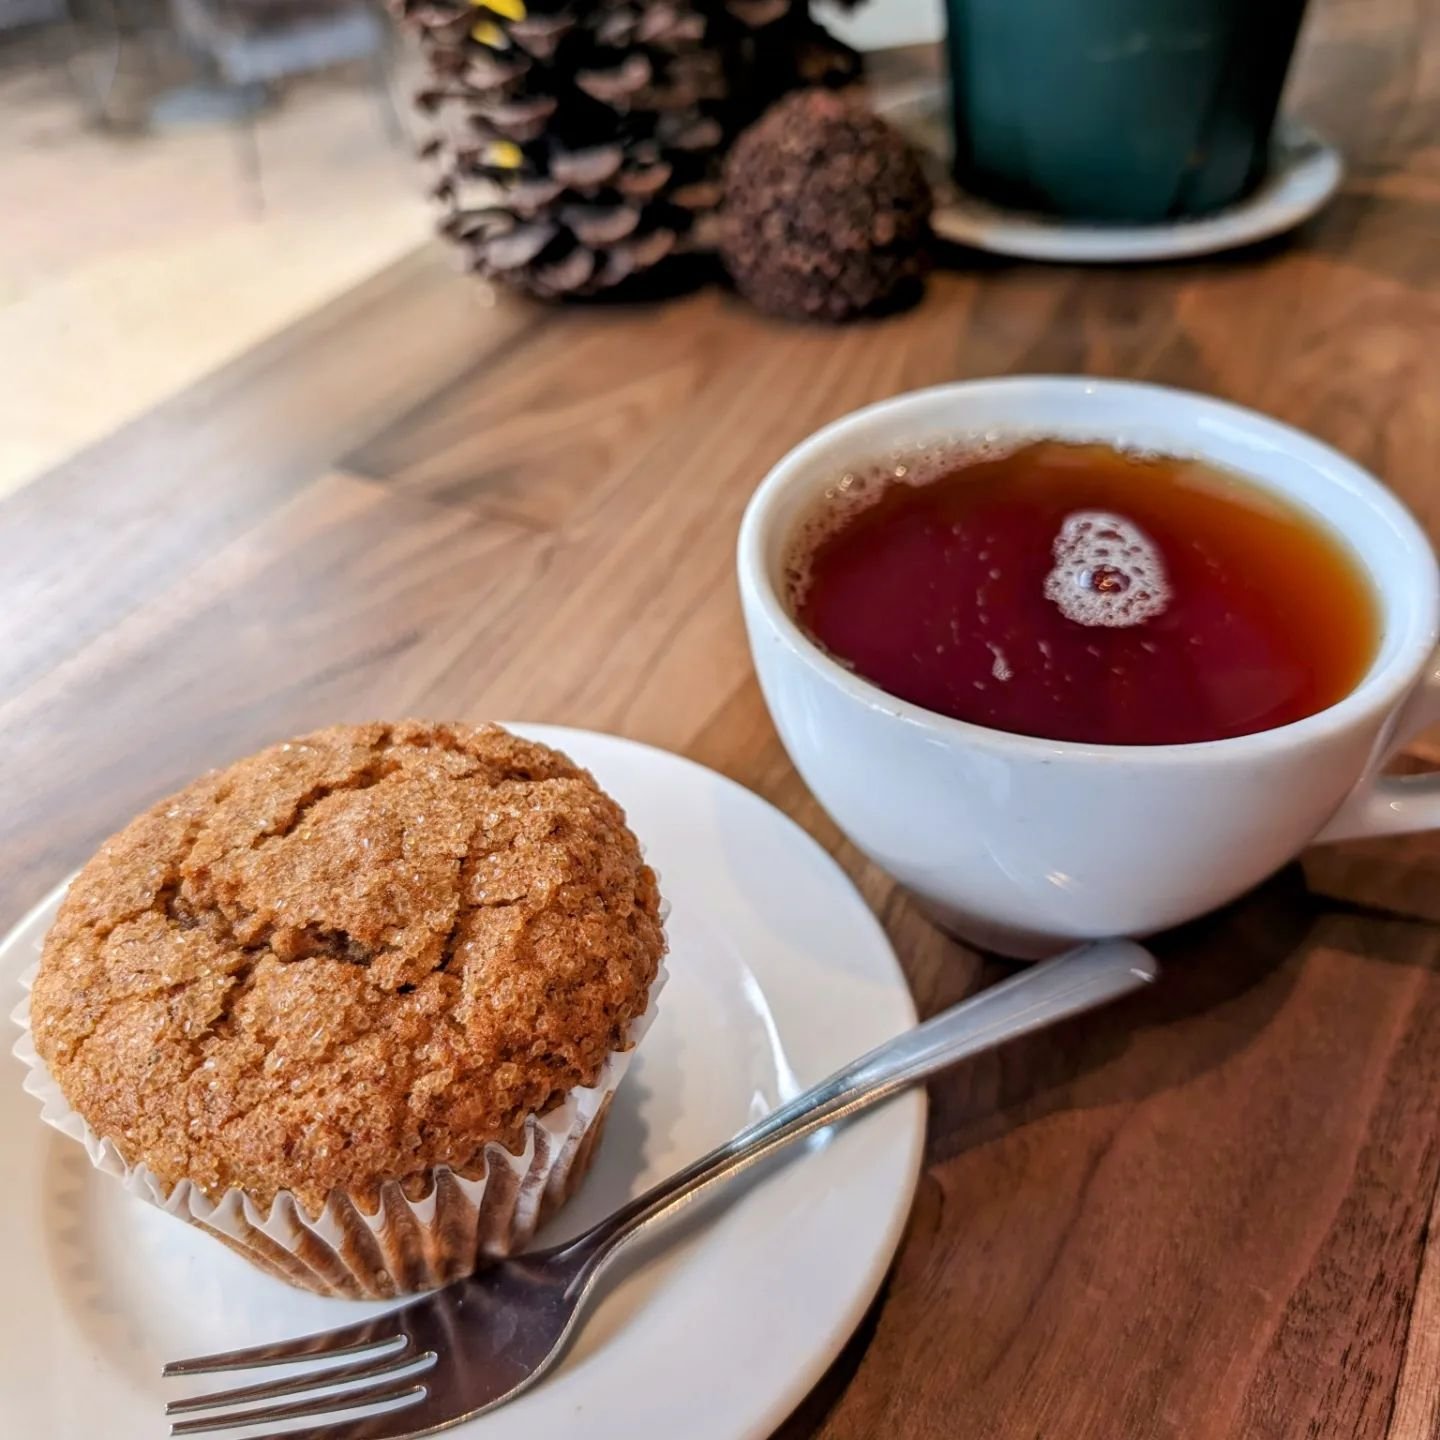 🍓 Local Strawberry Muffins
🫐 Blueberry Muffins
🌰 Vanilla Almond Muffins

Baked with love by The Living Room 🌈💕

Catch them in the pastry case this week! 
Pairs well with a hot tea and a rainy day 🧁☕🌧️

@LivingRoomSTL 

.
.
.
#TowerGrove #Tower